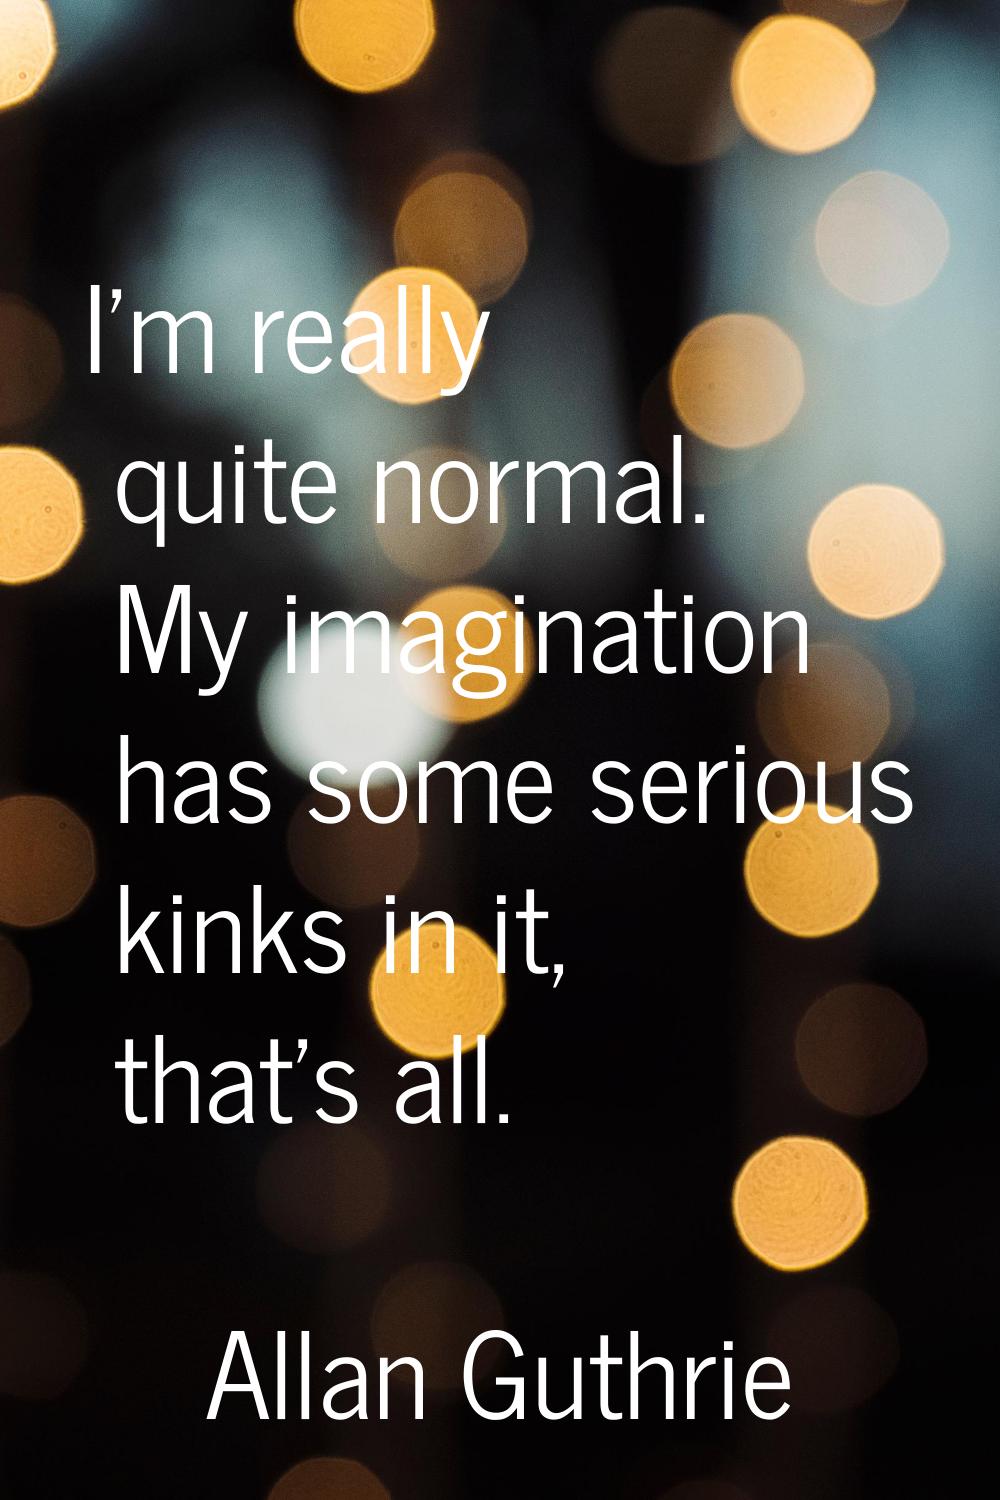 I'm really quite normal. My imagination has some serious kinks in it, that's all.